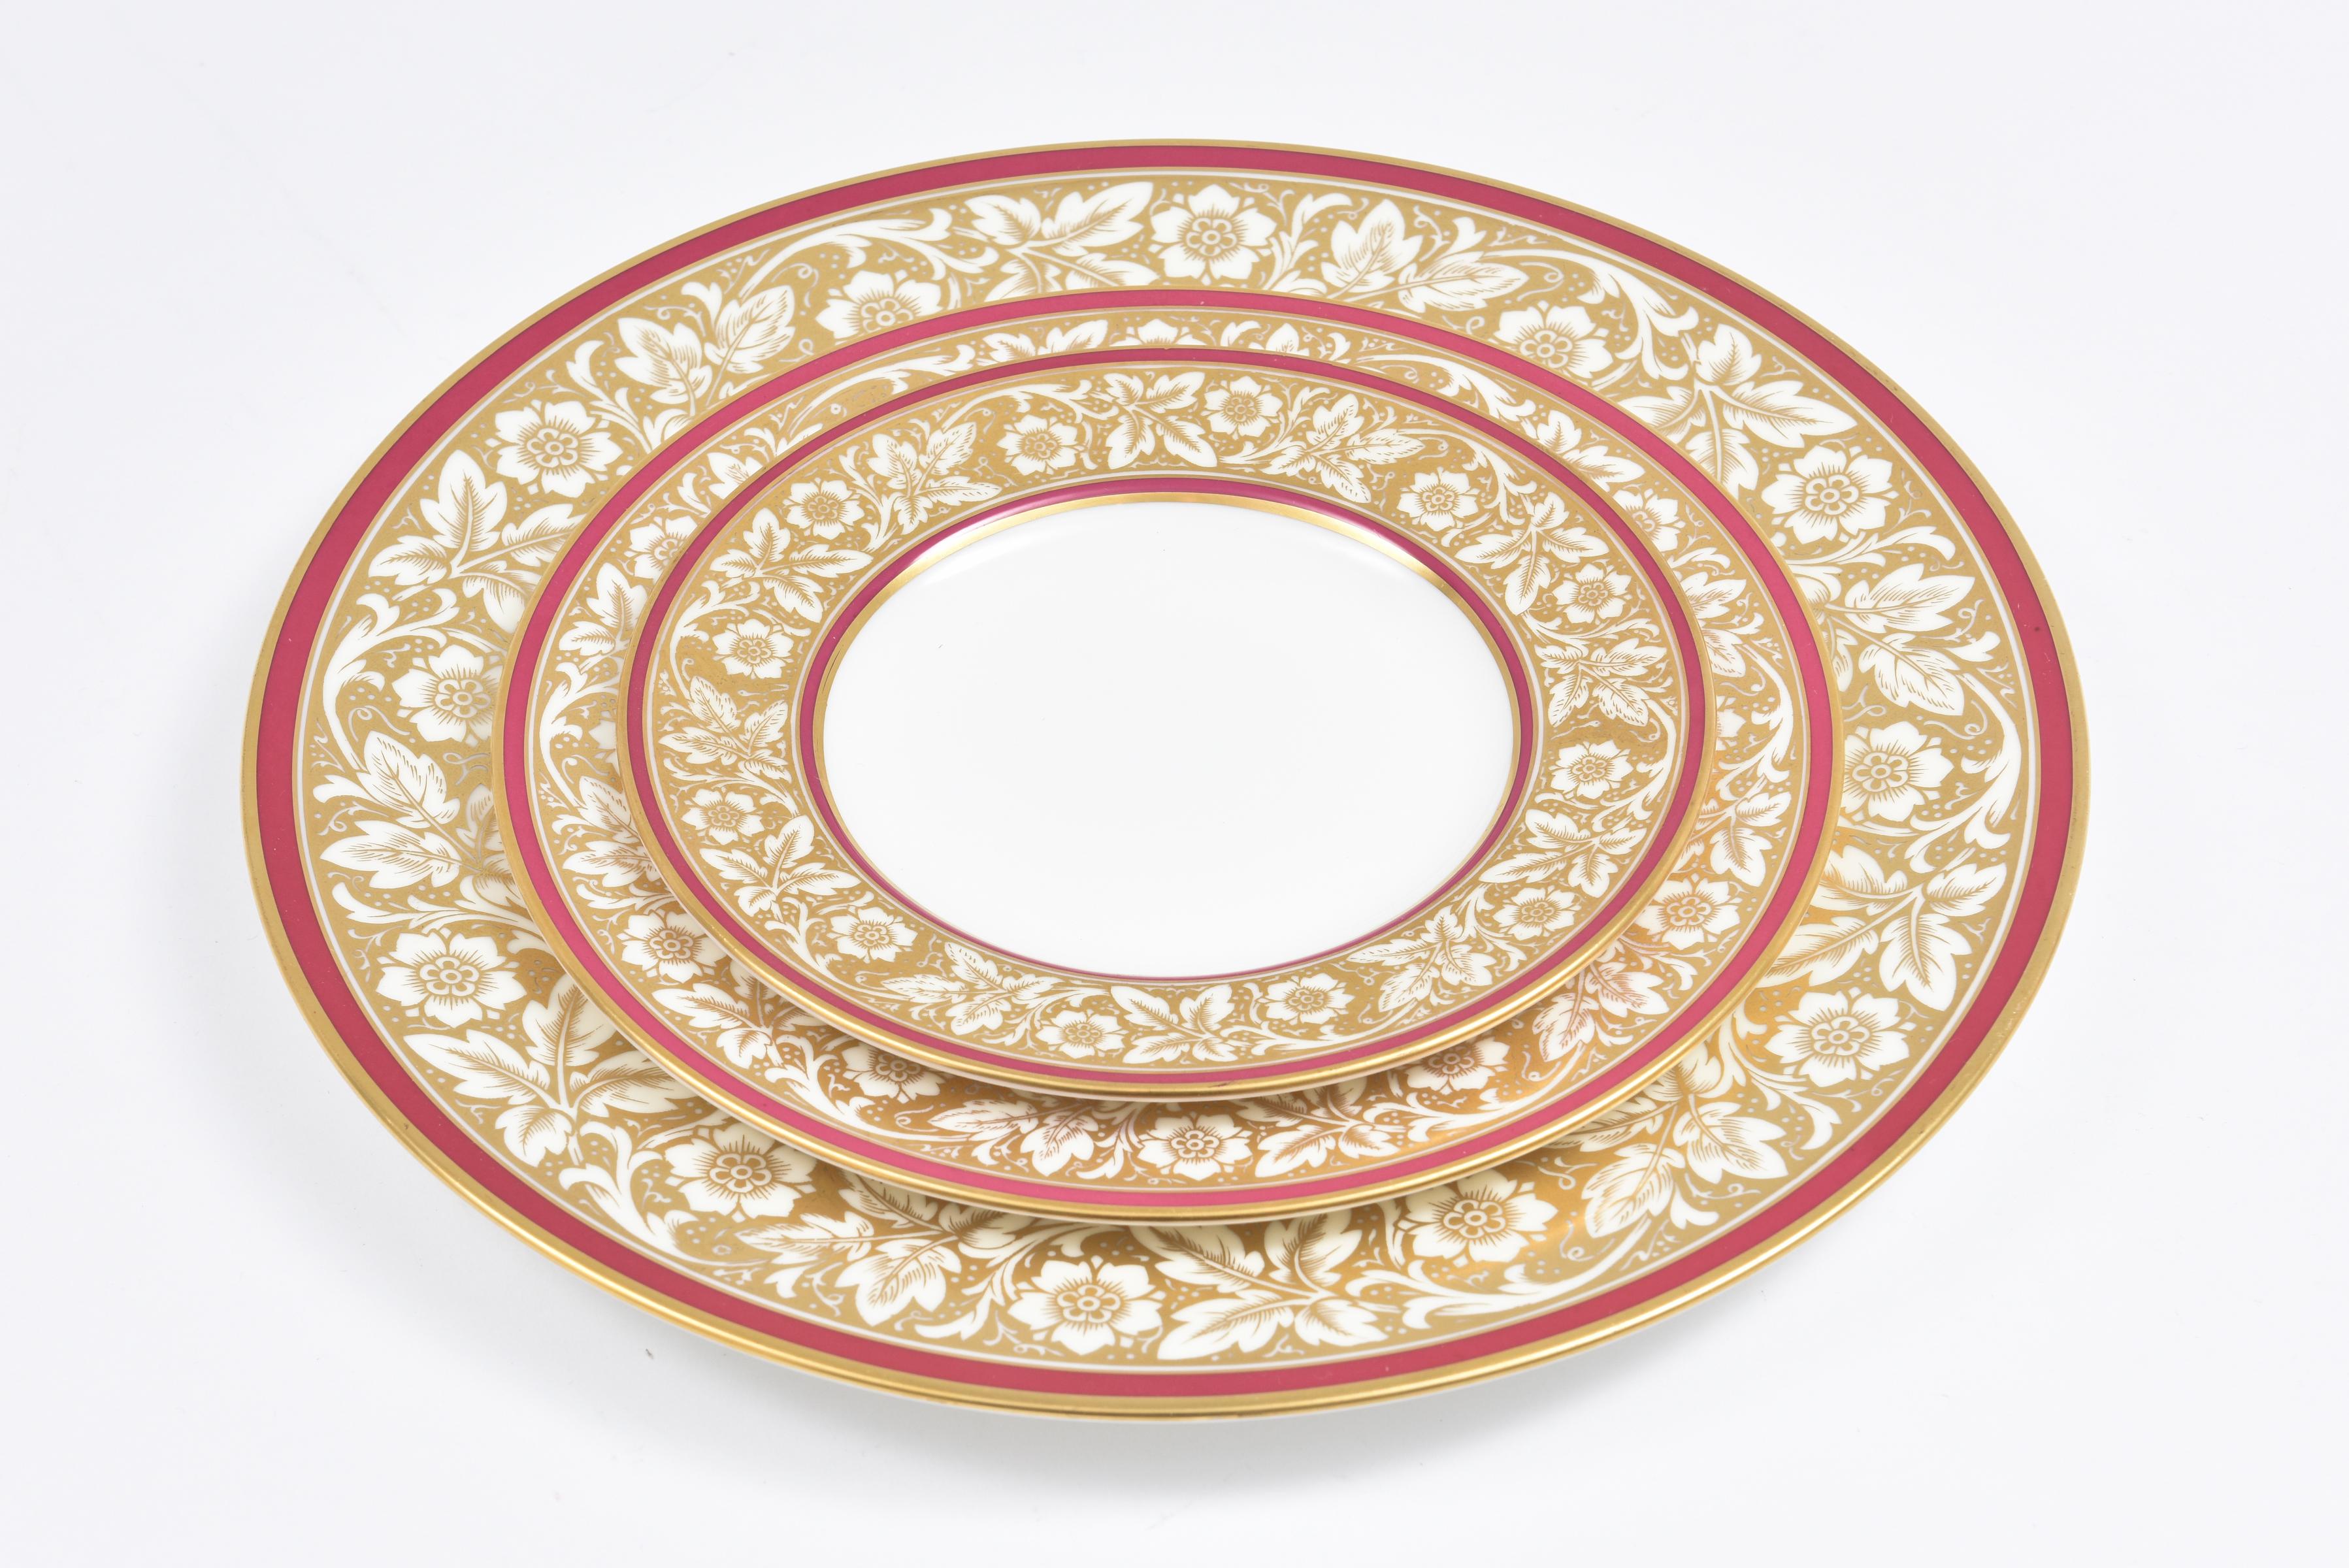 Hand-Crafted Service For 12, Minton England Fine Bone China Ruby & Gold Decoration 60 Pieces